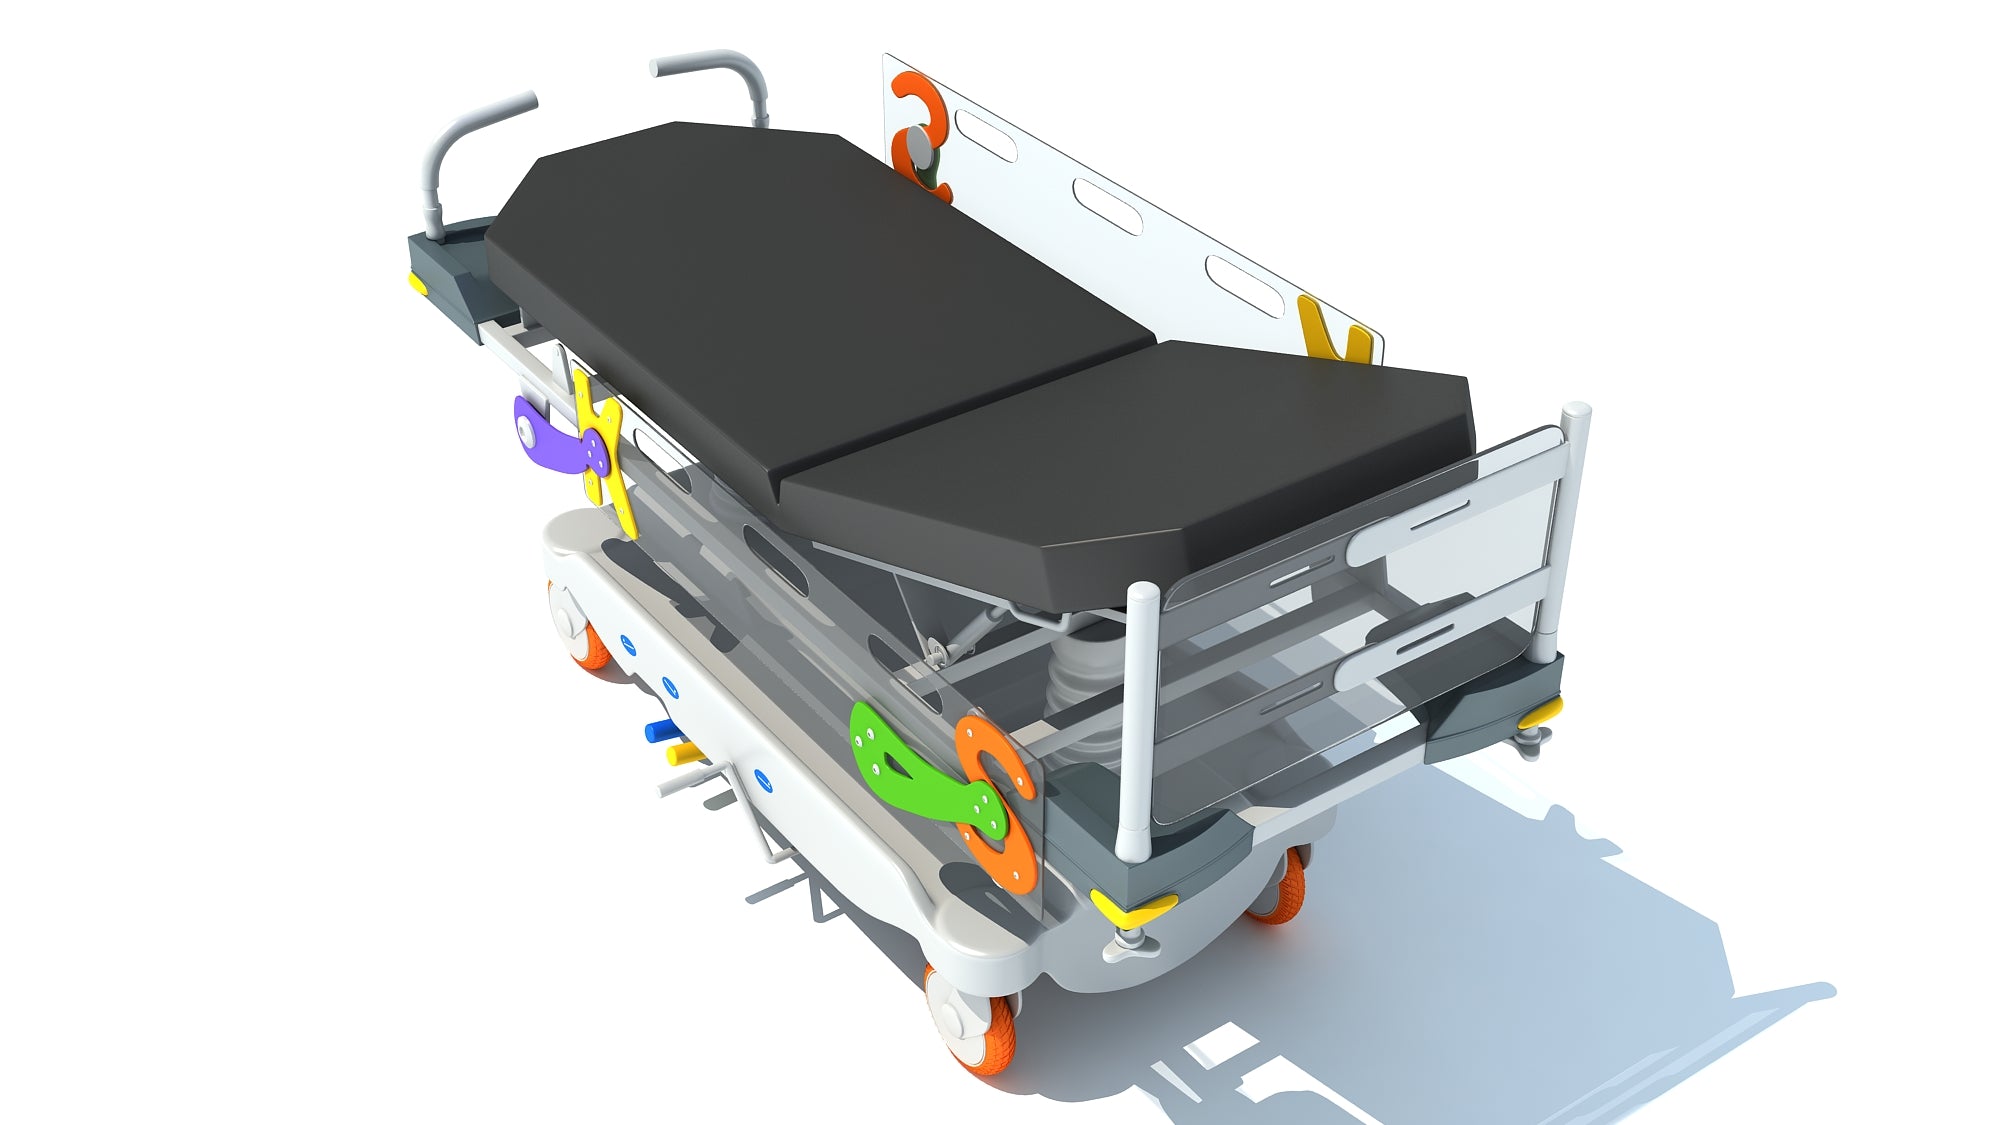 Stretcher Trolley for Kids